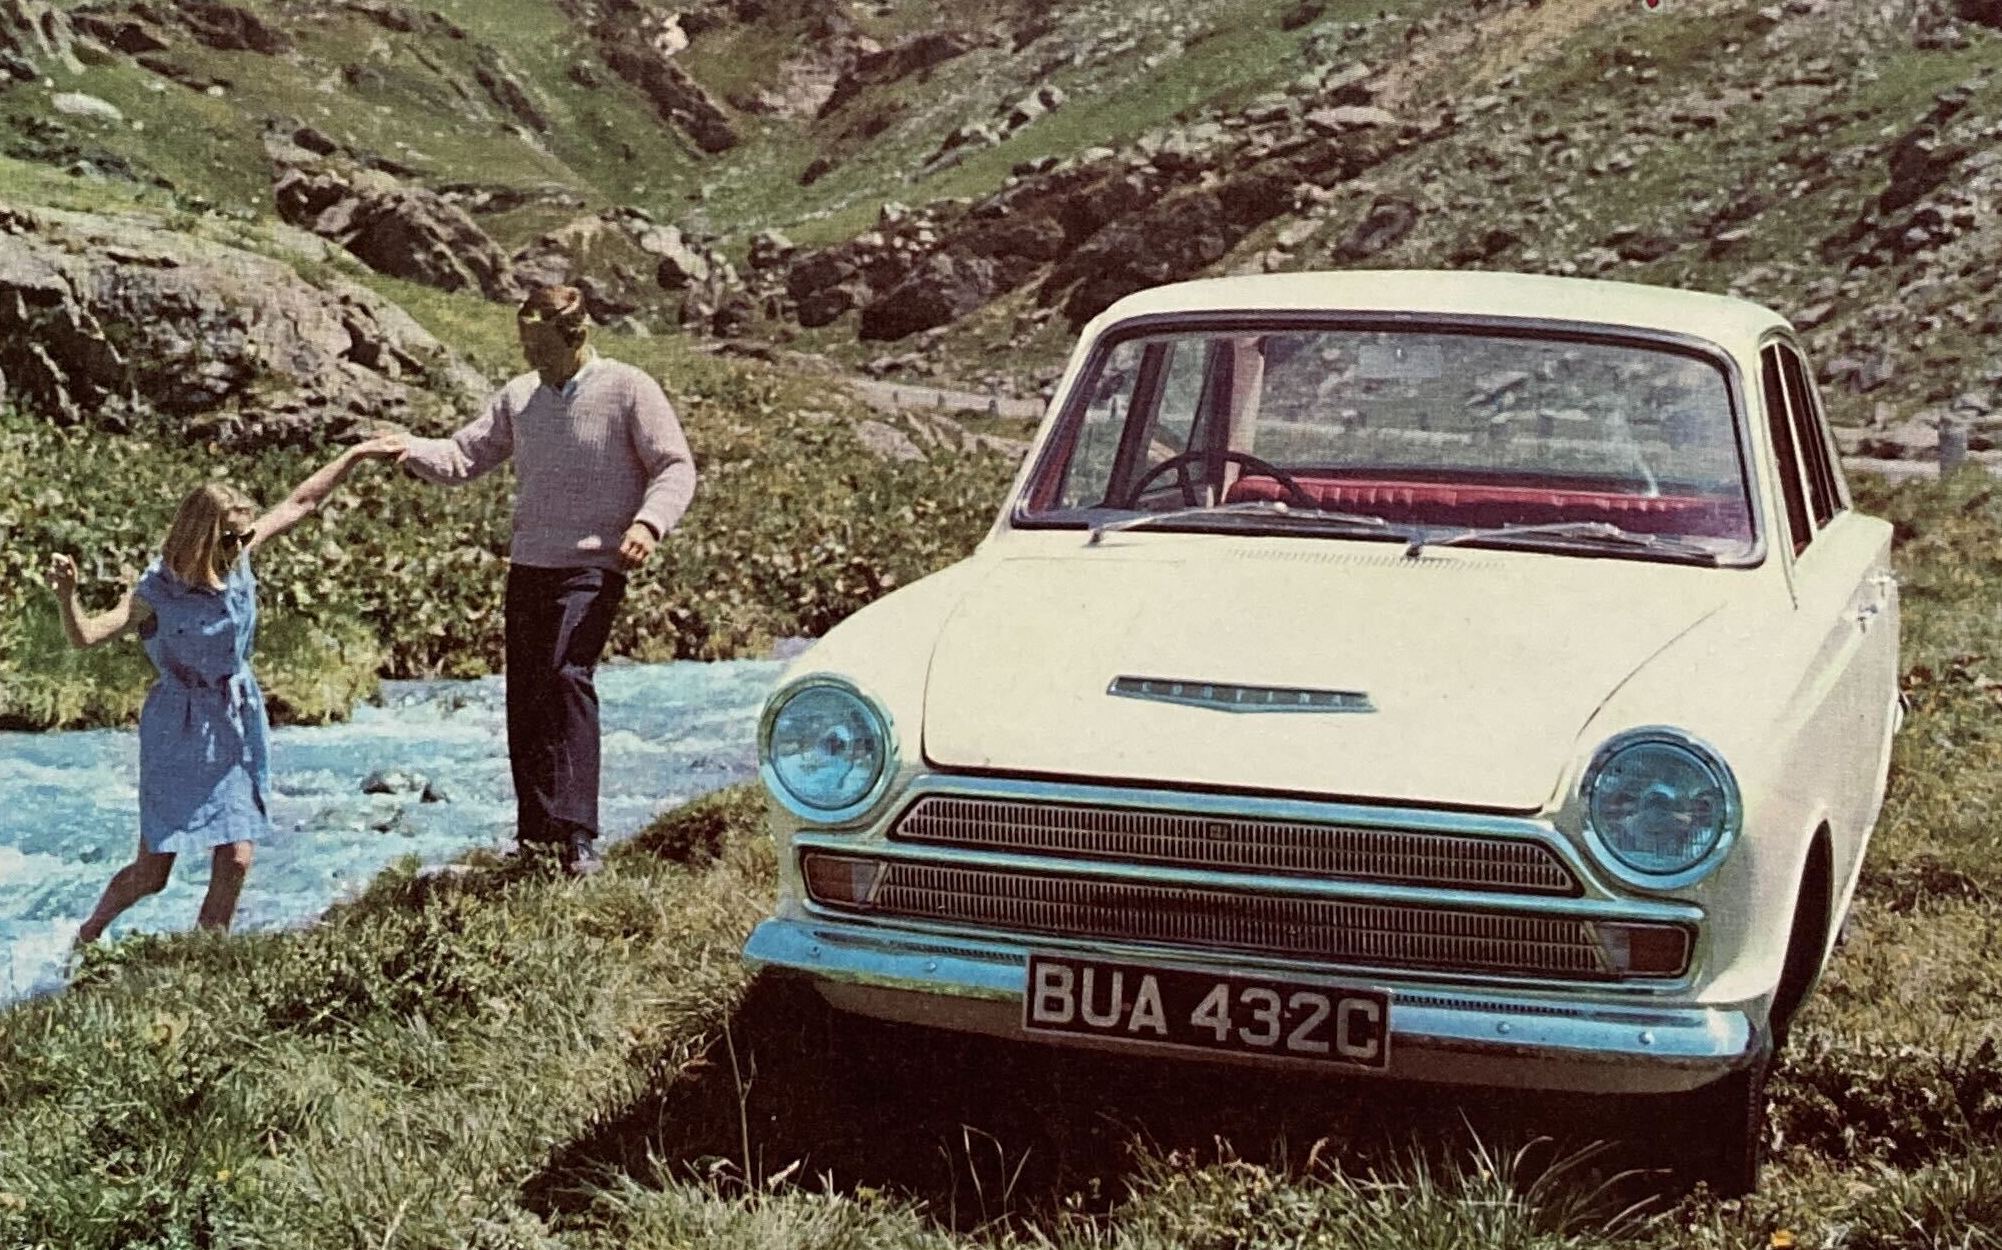 Ad Break: Cool off with a Cortina